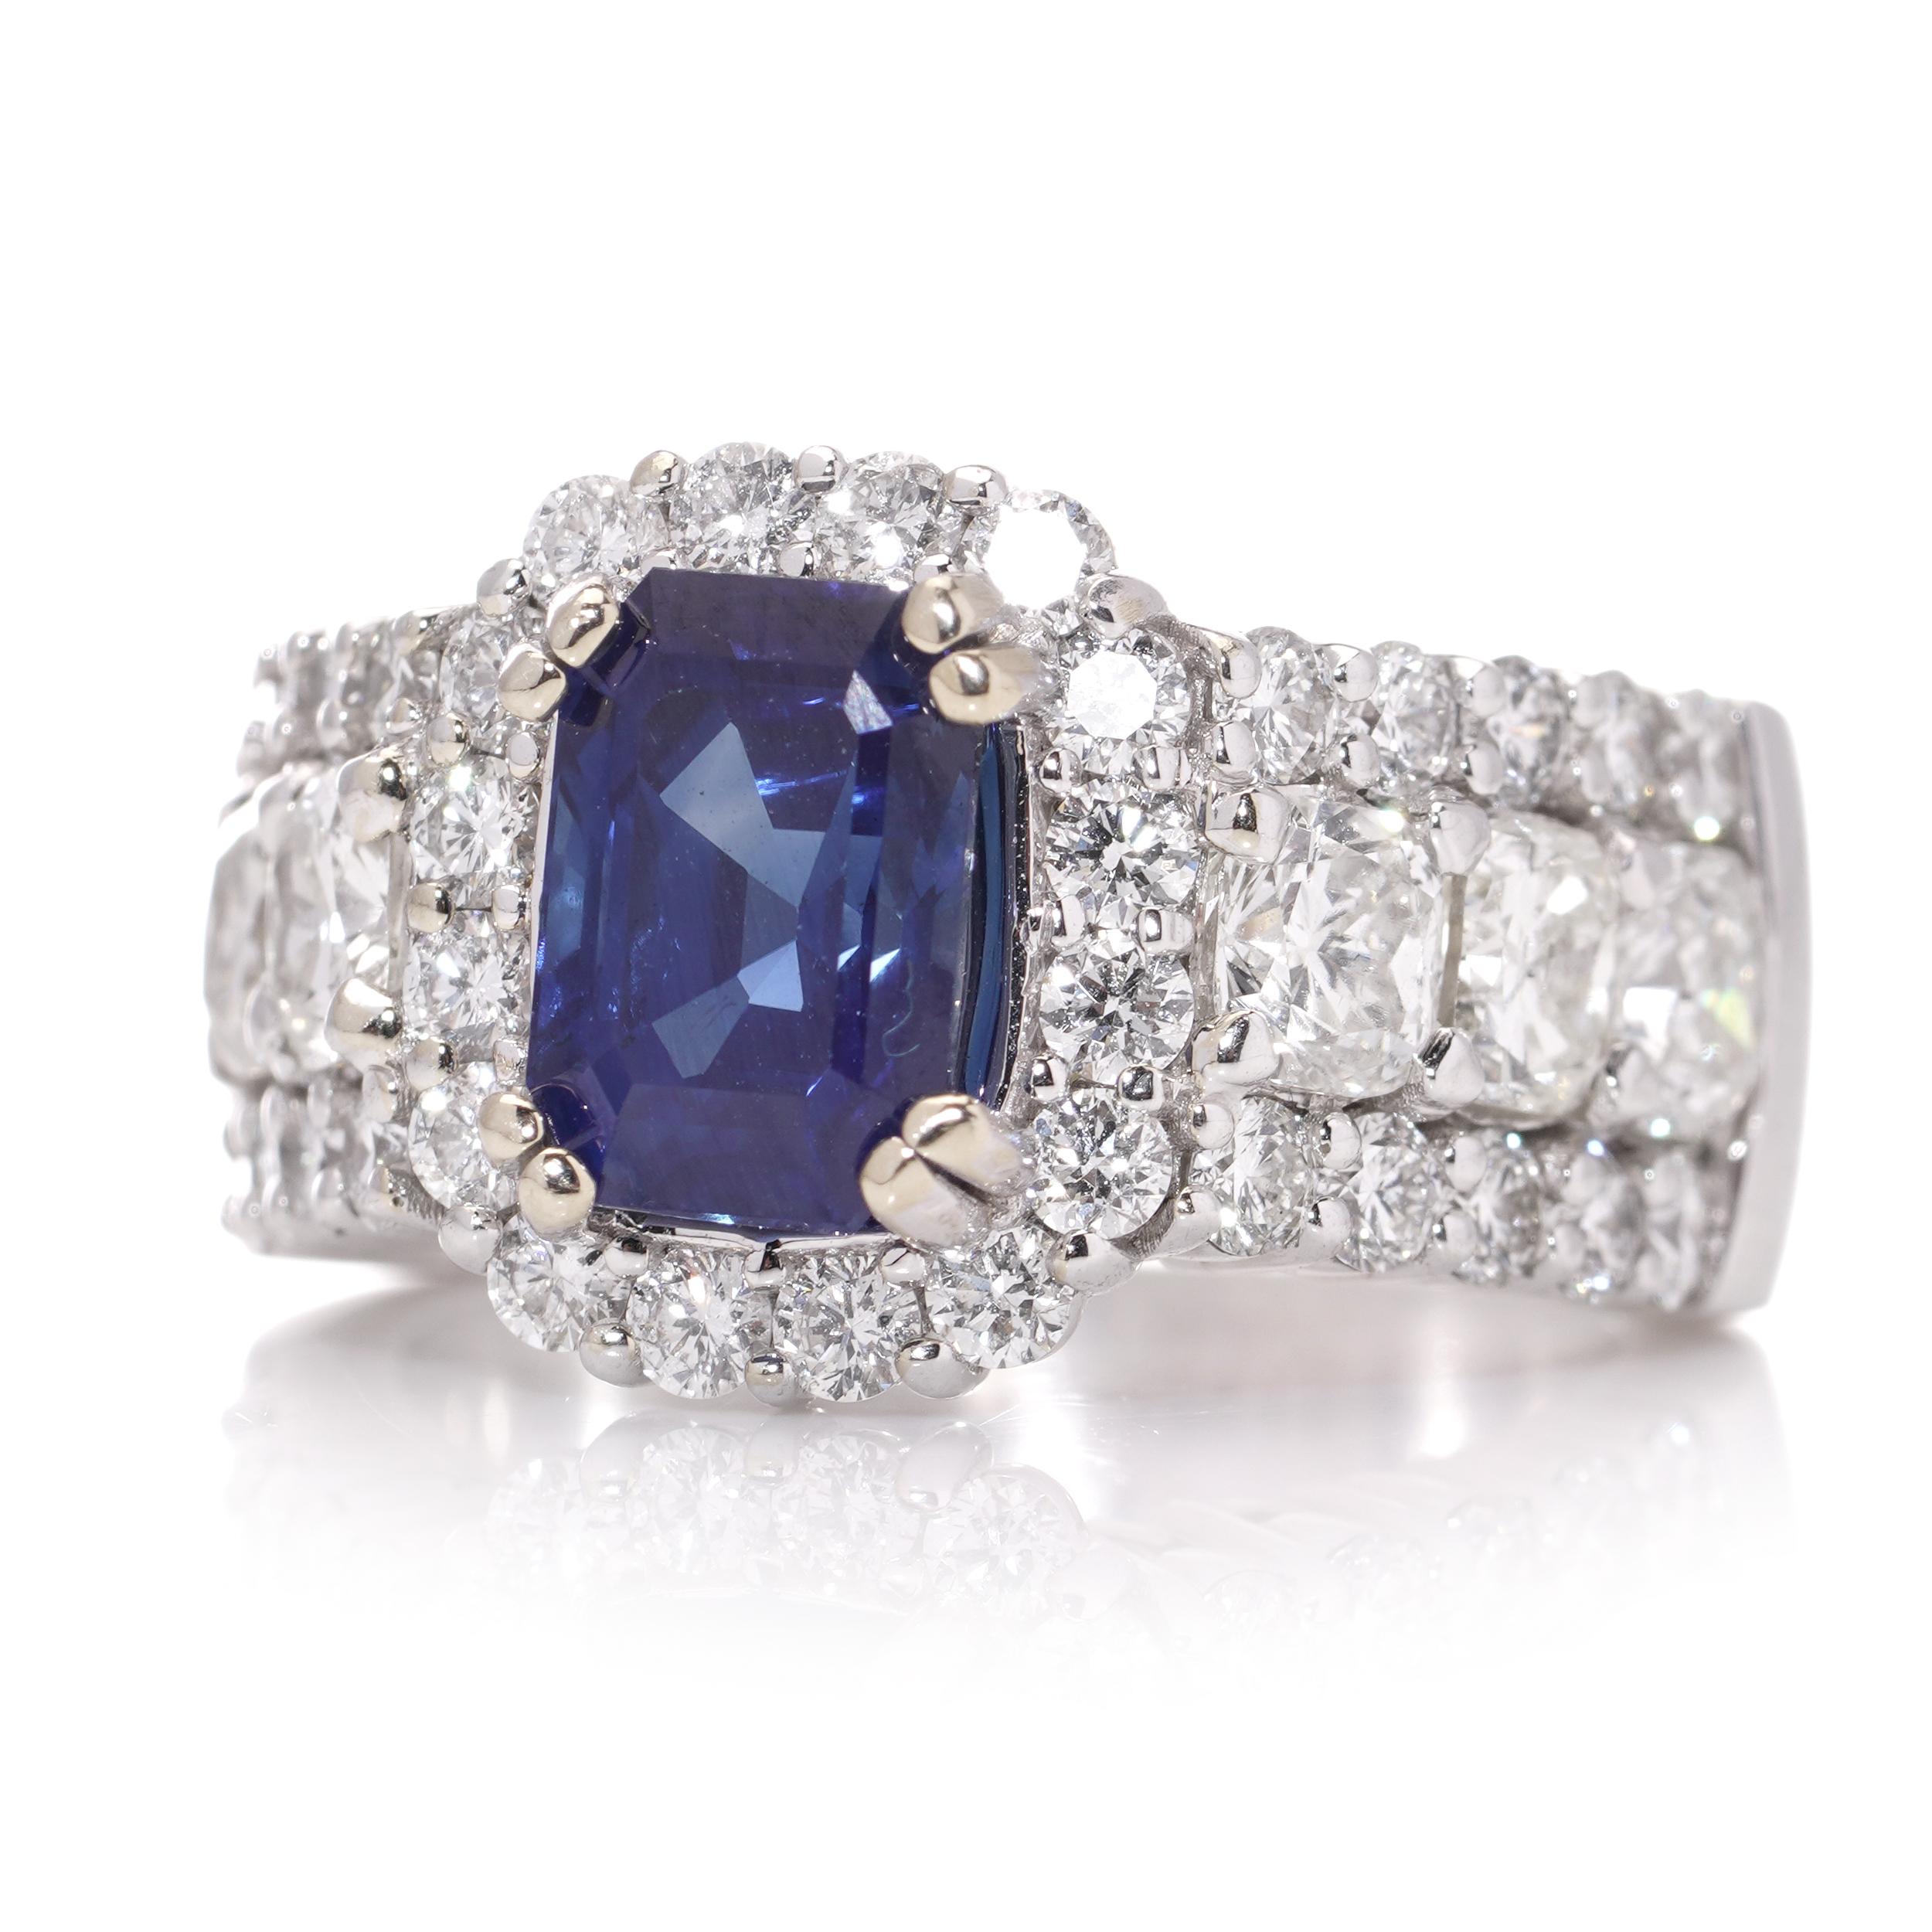 18kt white gold ladies ring with natural Corundum sapphire with diamonds.
Circa 2000's

Dimensions - 
Weight : 14 grams
Finger Size (UK) = M (US) = 6 1/2 (EU) = 52 1/2
Size : 2.7 x 2.3 x 1.3 cm

Sapphire - 
Shape : Octagonal
Cutting Style : Step